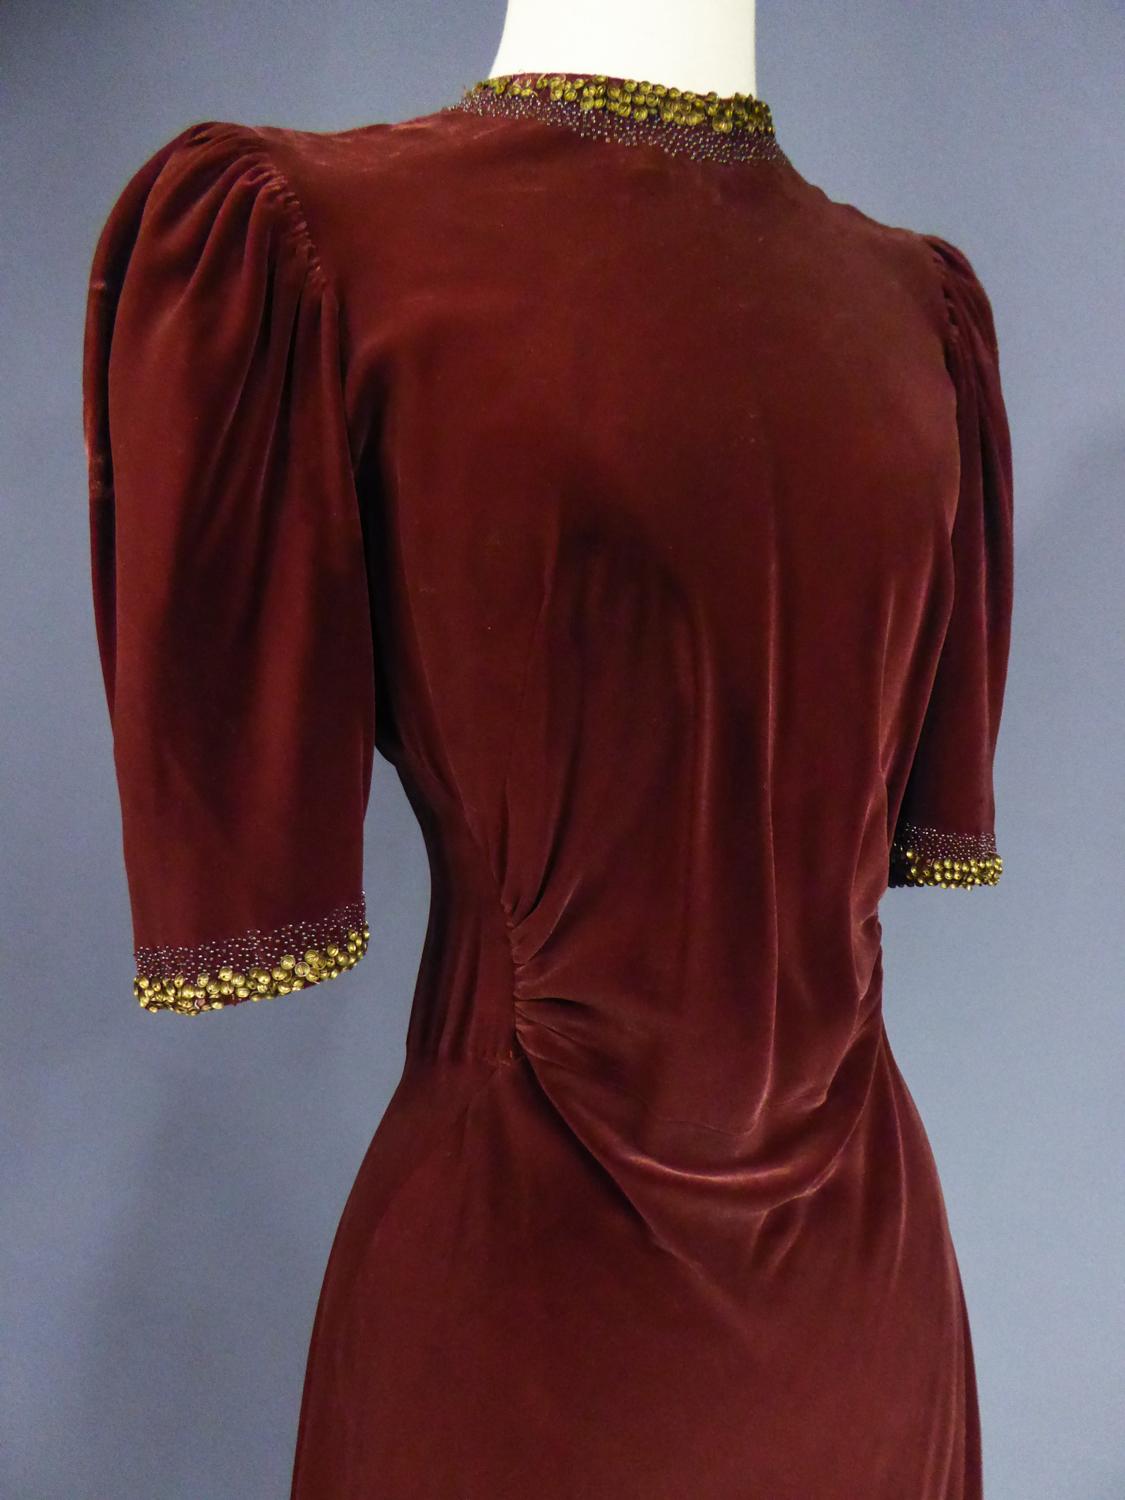 Women's A French Couture Beaded Chocolate Velvet Dress Circa 1940-1950 For Sale